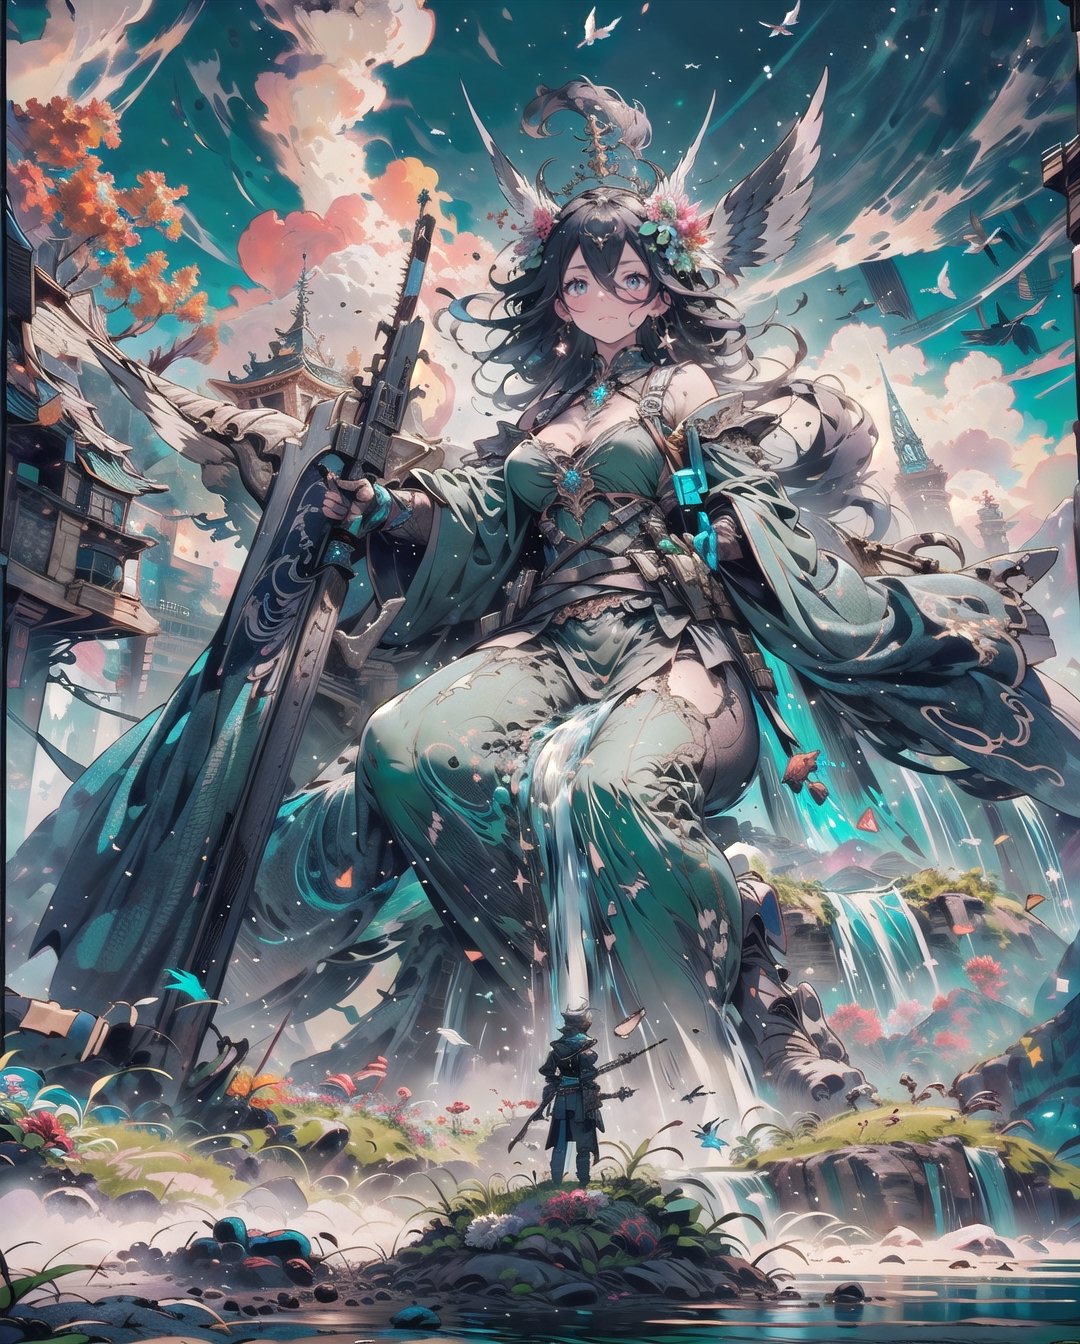 fire burning,Medieval equipment,  left man and right woman, knights (ensemble stars!),armor, wings, sky,white armor, cloud, outdoors, angel wings, bird,blend, medium shot, bokeh,outdoors, open grassland, symmetrical composition, low-angle shooting, zoom in, the most beautiful image I have ever seen, wide angle , distant view, looking up, combat scene, action_pose,Massive sandstone pyramid city, housing units, tropical landscape, tropical flowers, lush green grass. river, waterfall, hyper detailed 8k, unreal engine.
EpicArt,full_gear_soldier,full gear,retrobigguns,r41l